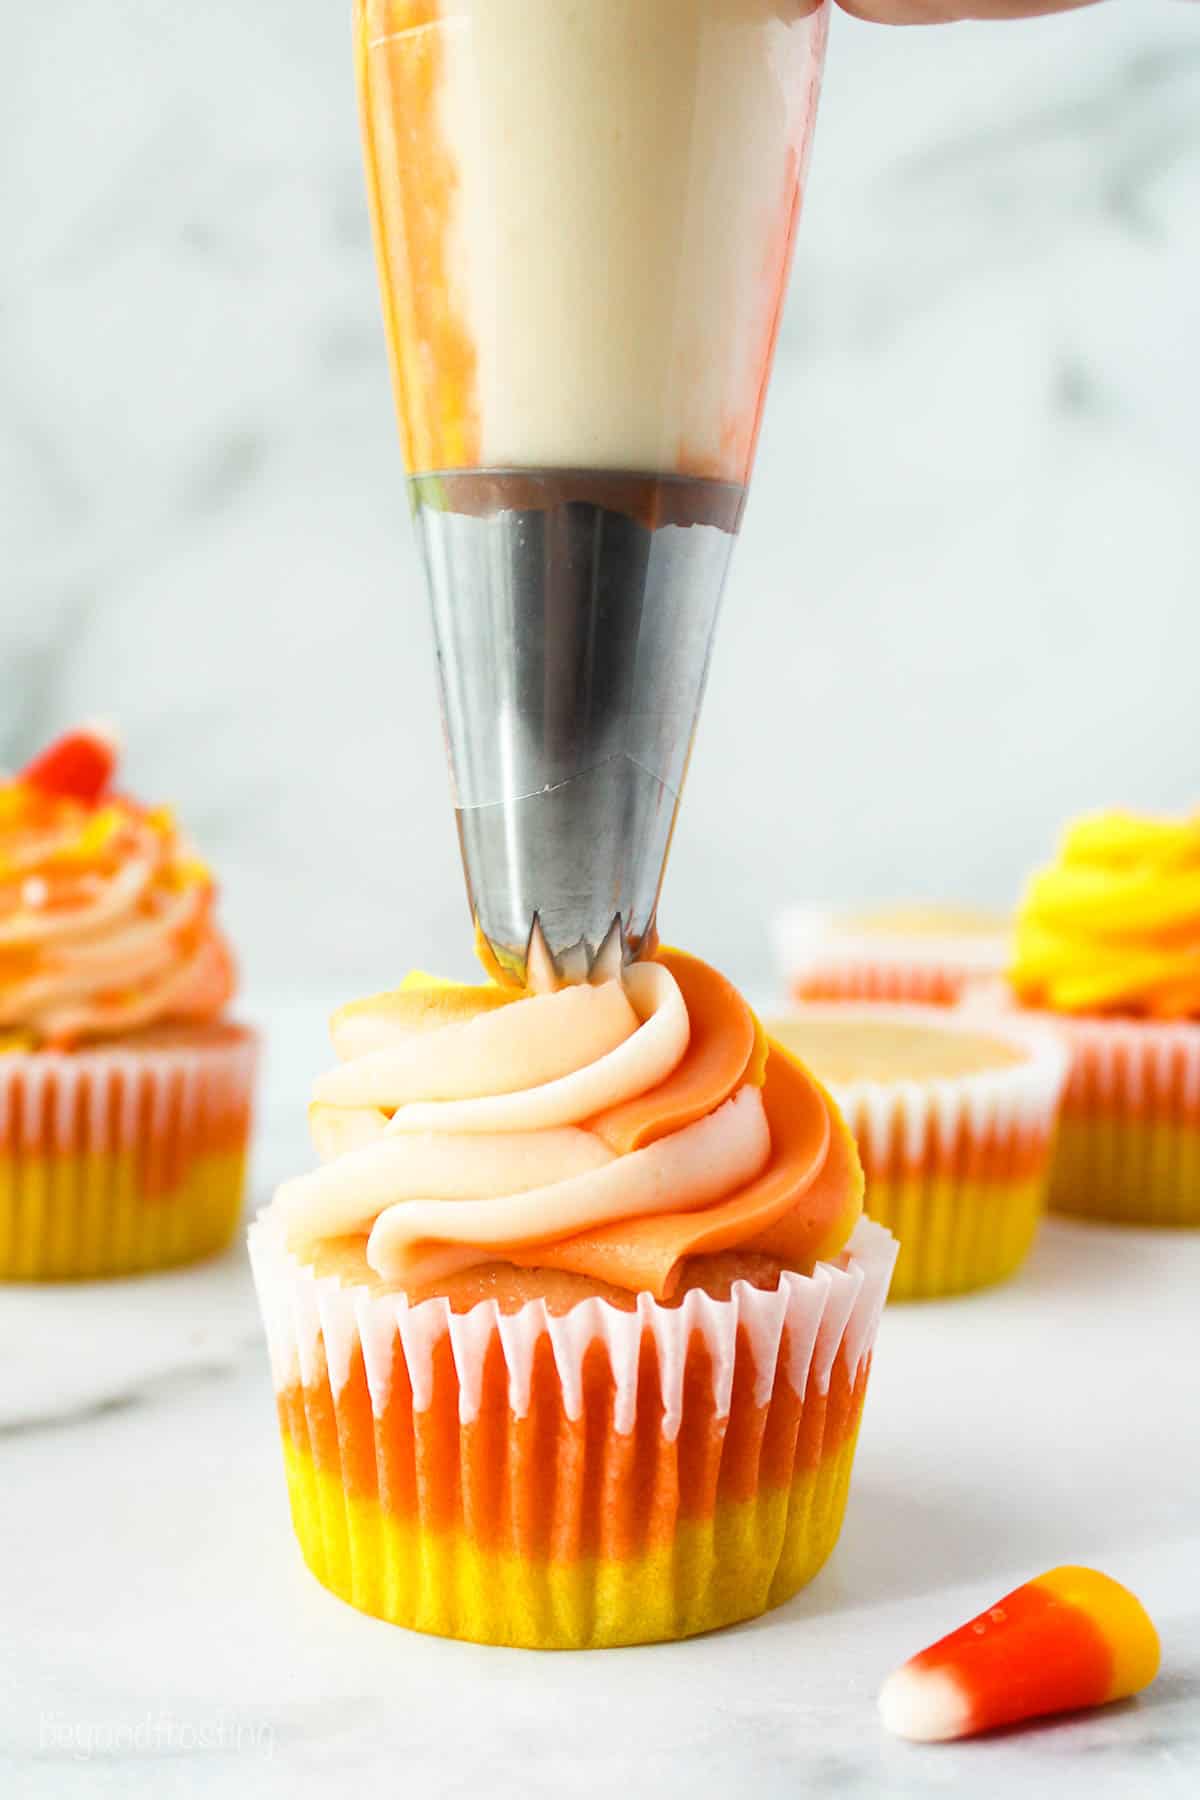 A piping bag frosting a cupcake with white, orange and yellow frosting